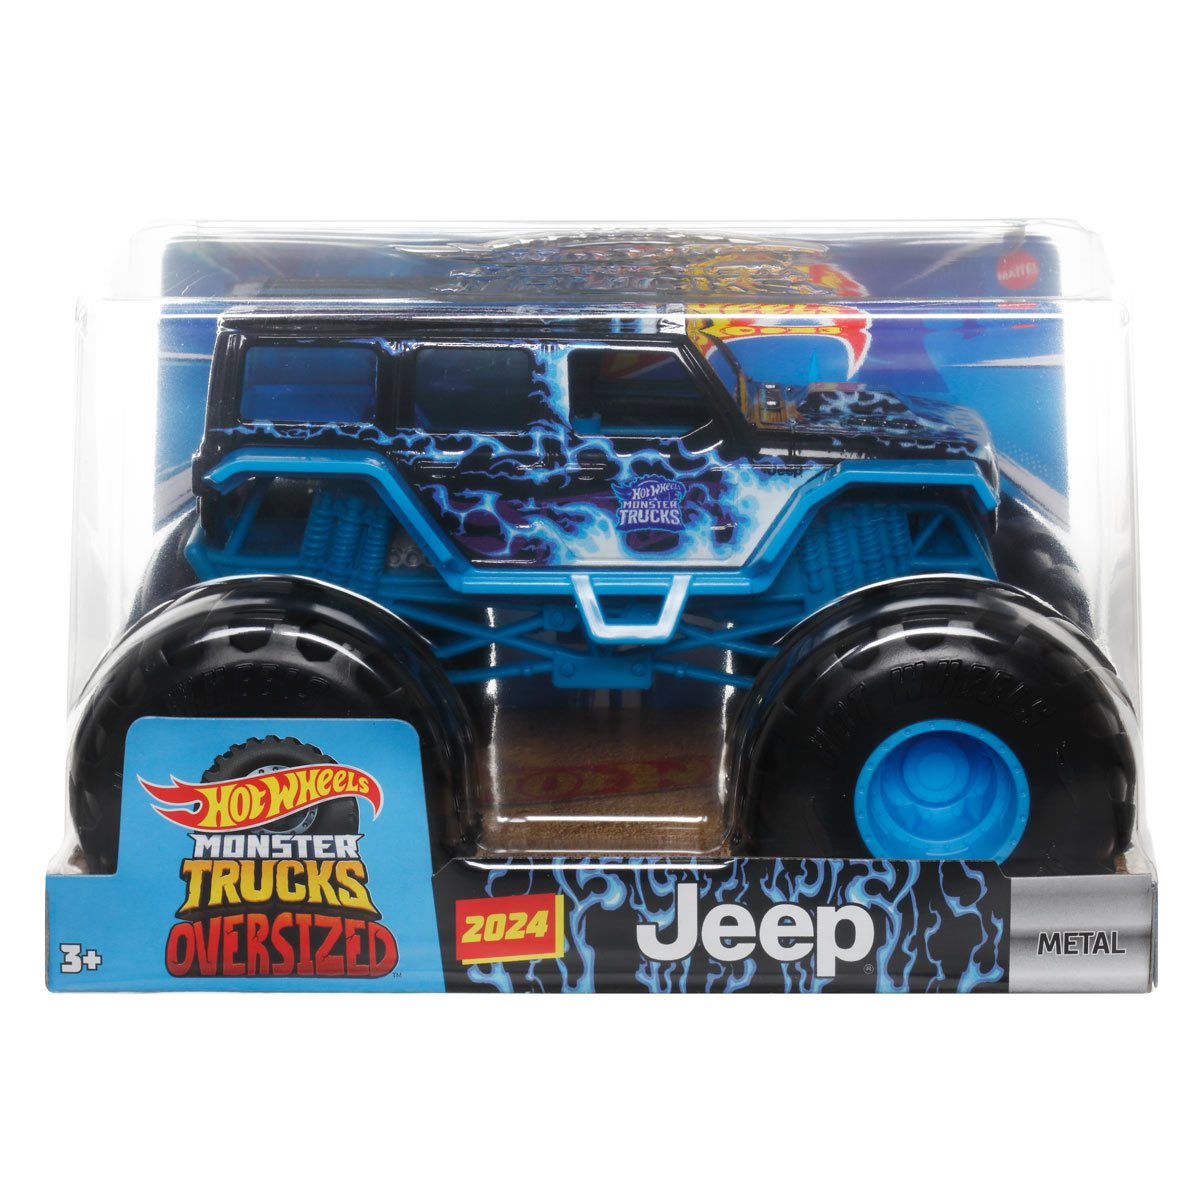 Outlet-Schnäppchenkauf Hot Wheels Monster Trucks Case 4 1 Vehicle Scale 1:24 Mix of 2024